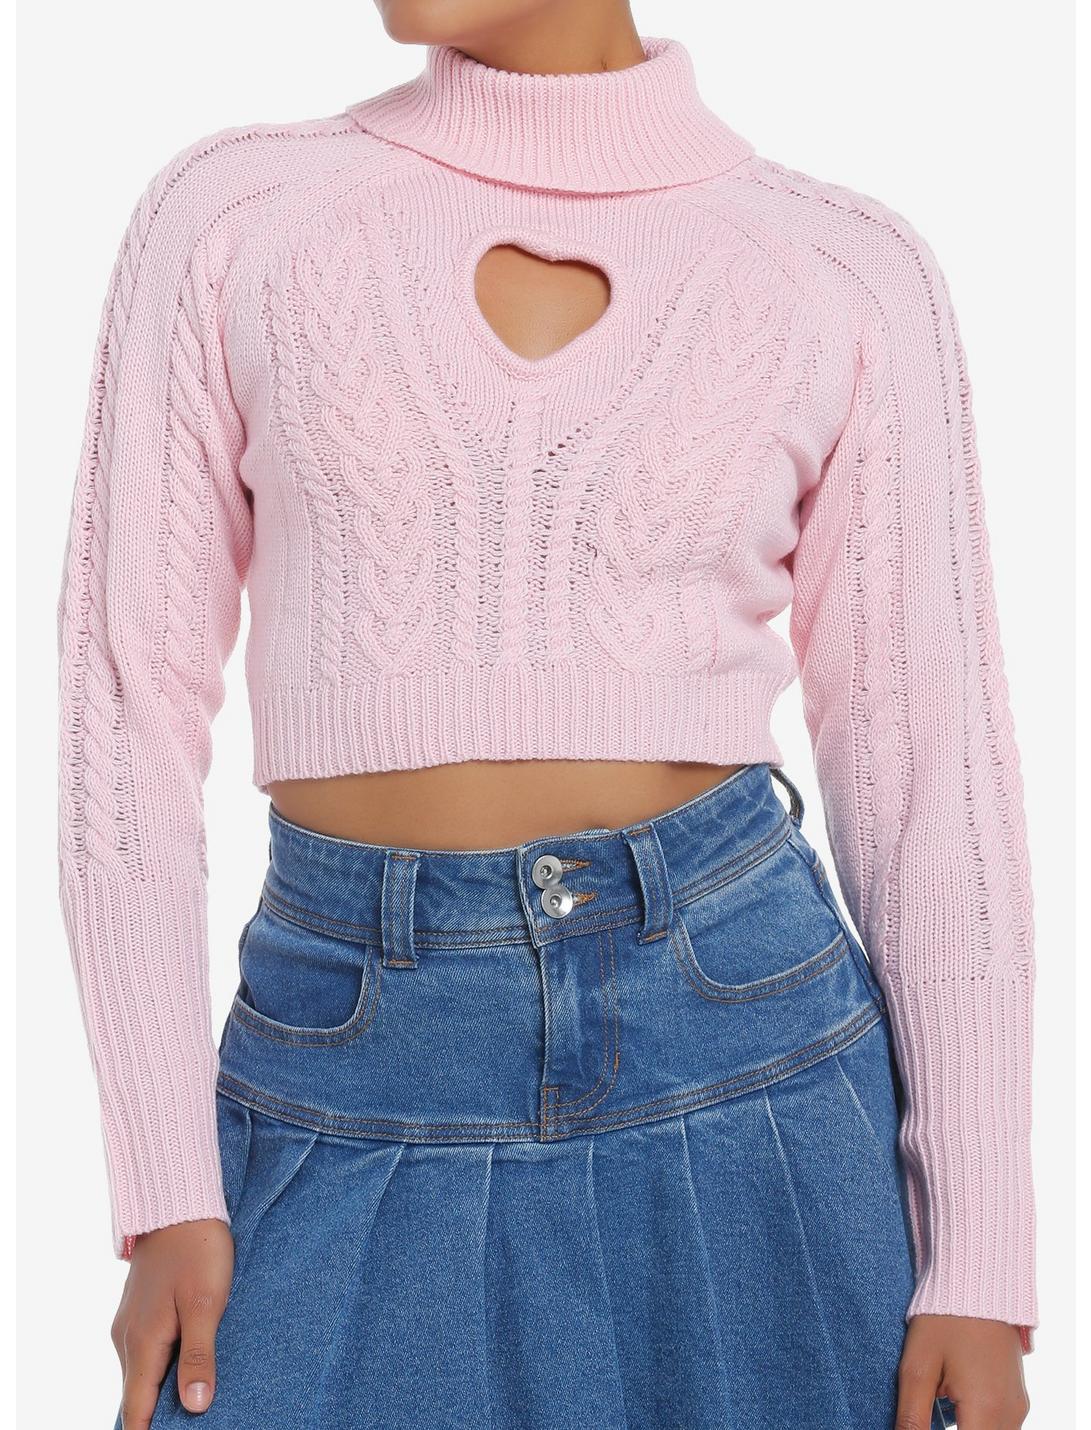 Sweet Society Pastel Pink Cable Knit Heart Girls Turtleneck Sweater ...